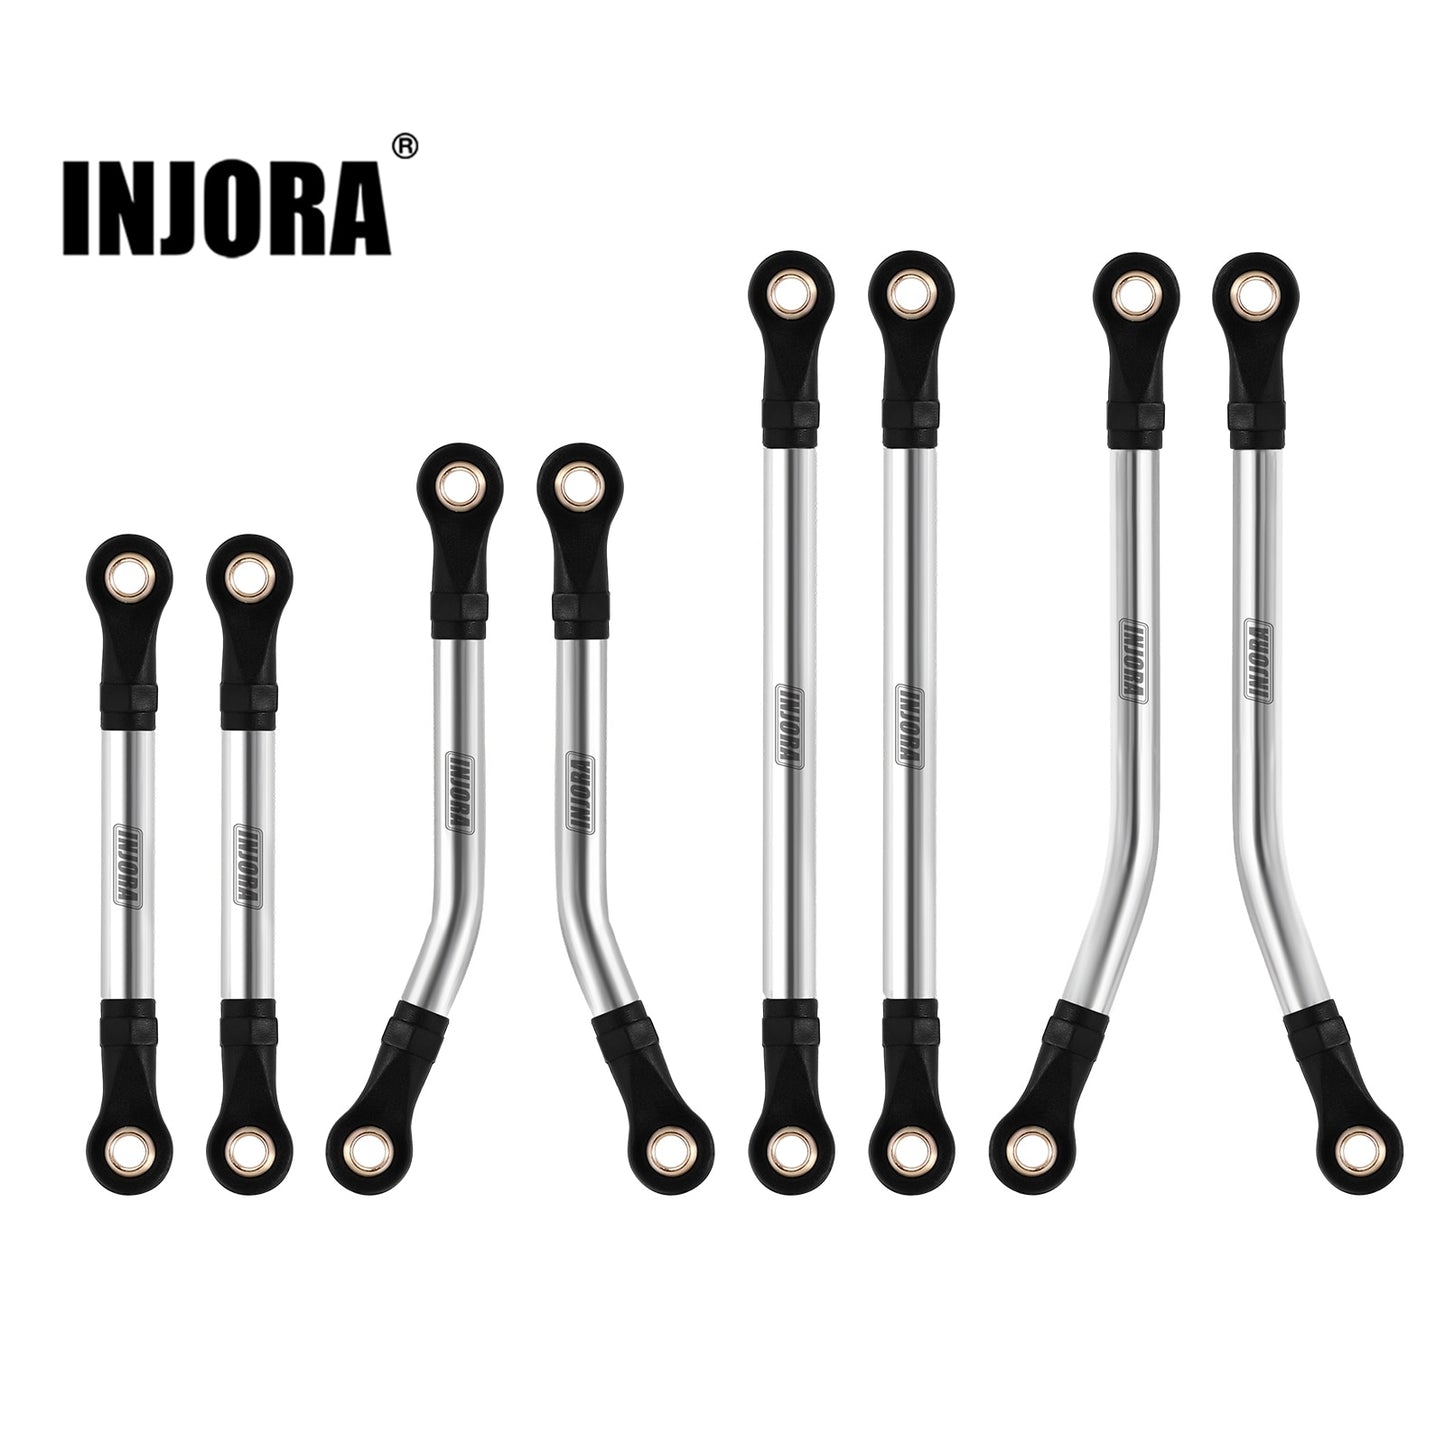 INJORA 8PCS Stainless Steel High Clearance Links Set for 1/18 RC Crawler TRX4M Upgrade Parts (4M-08)